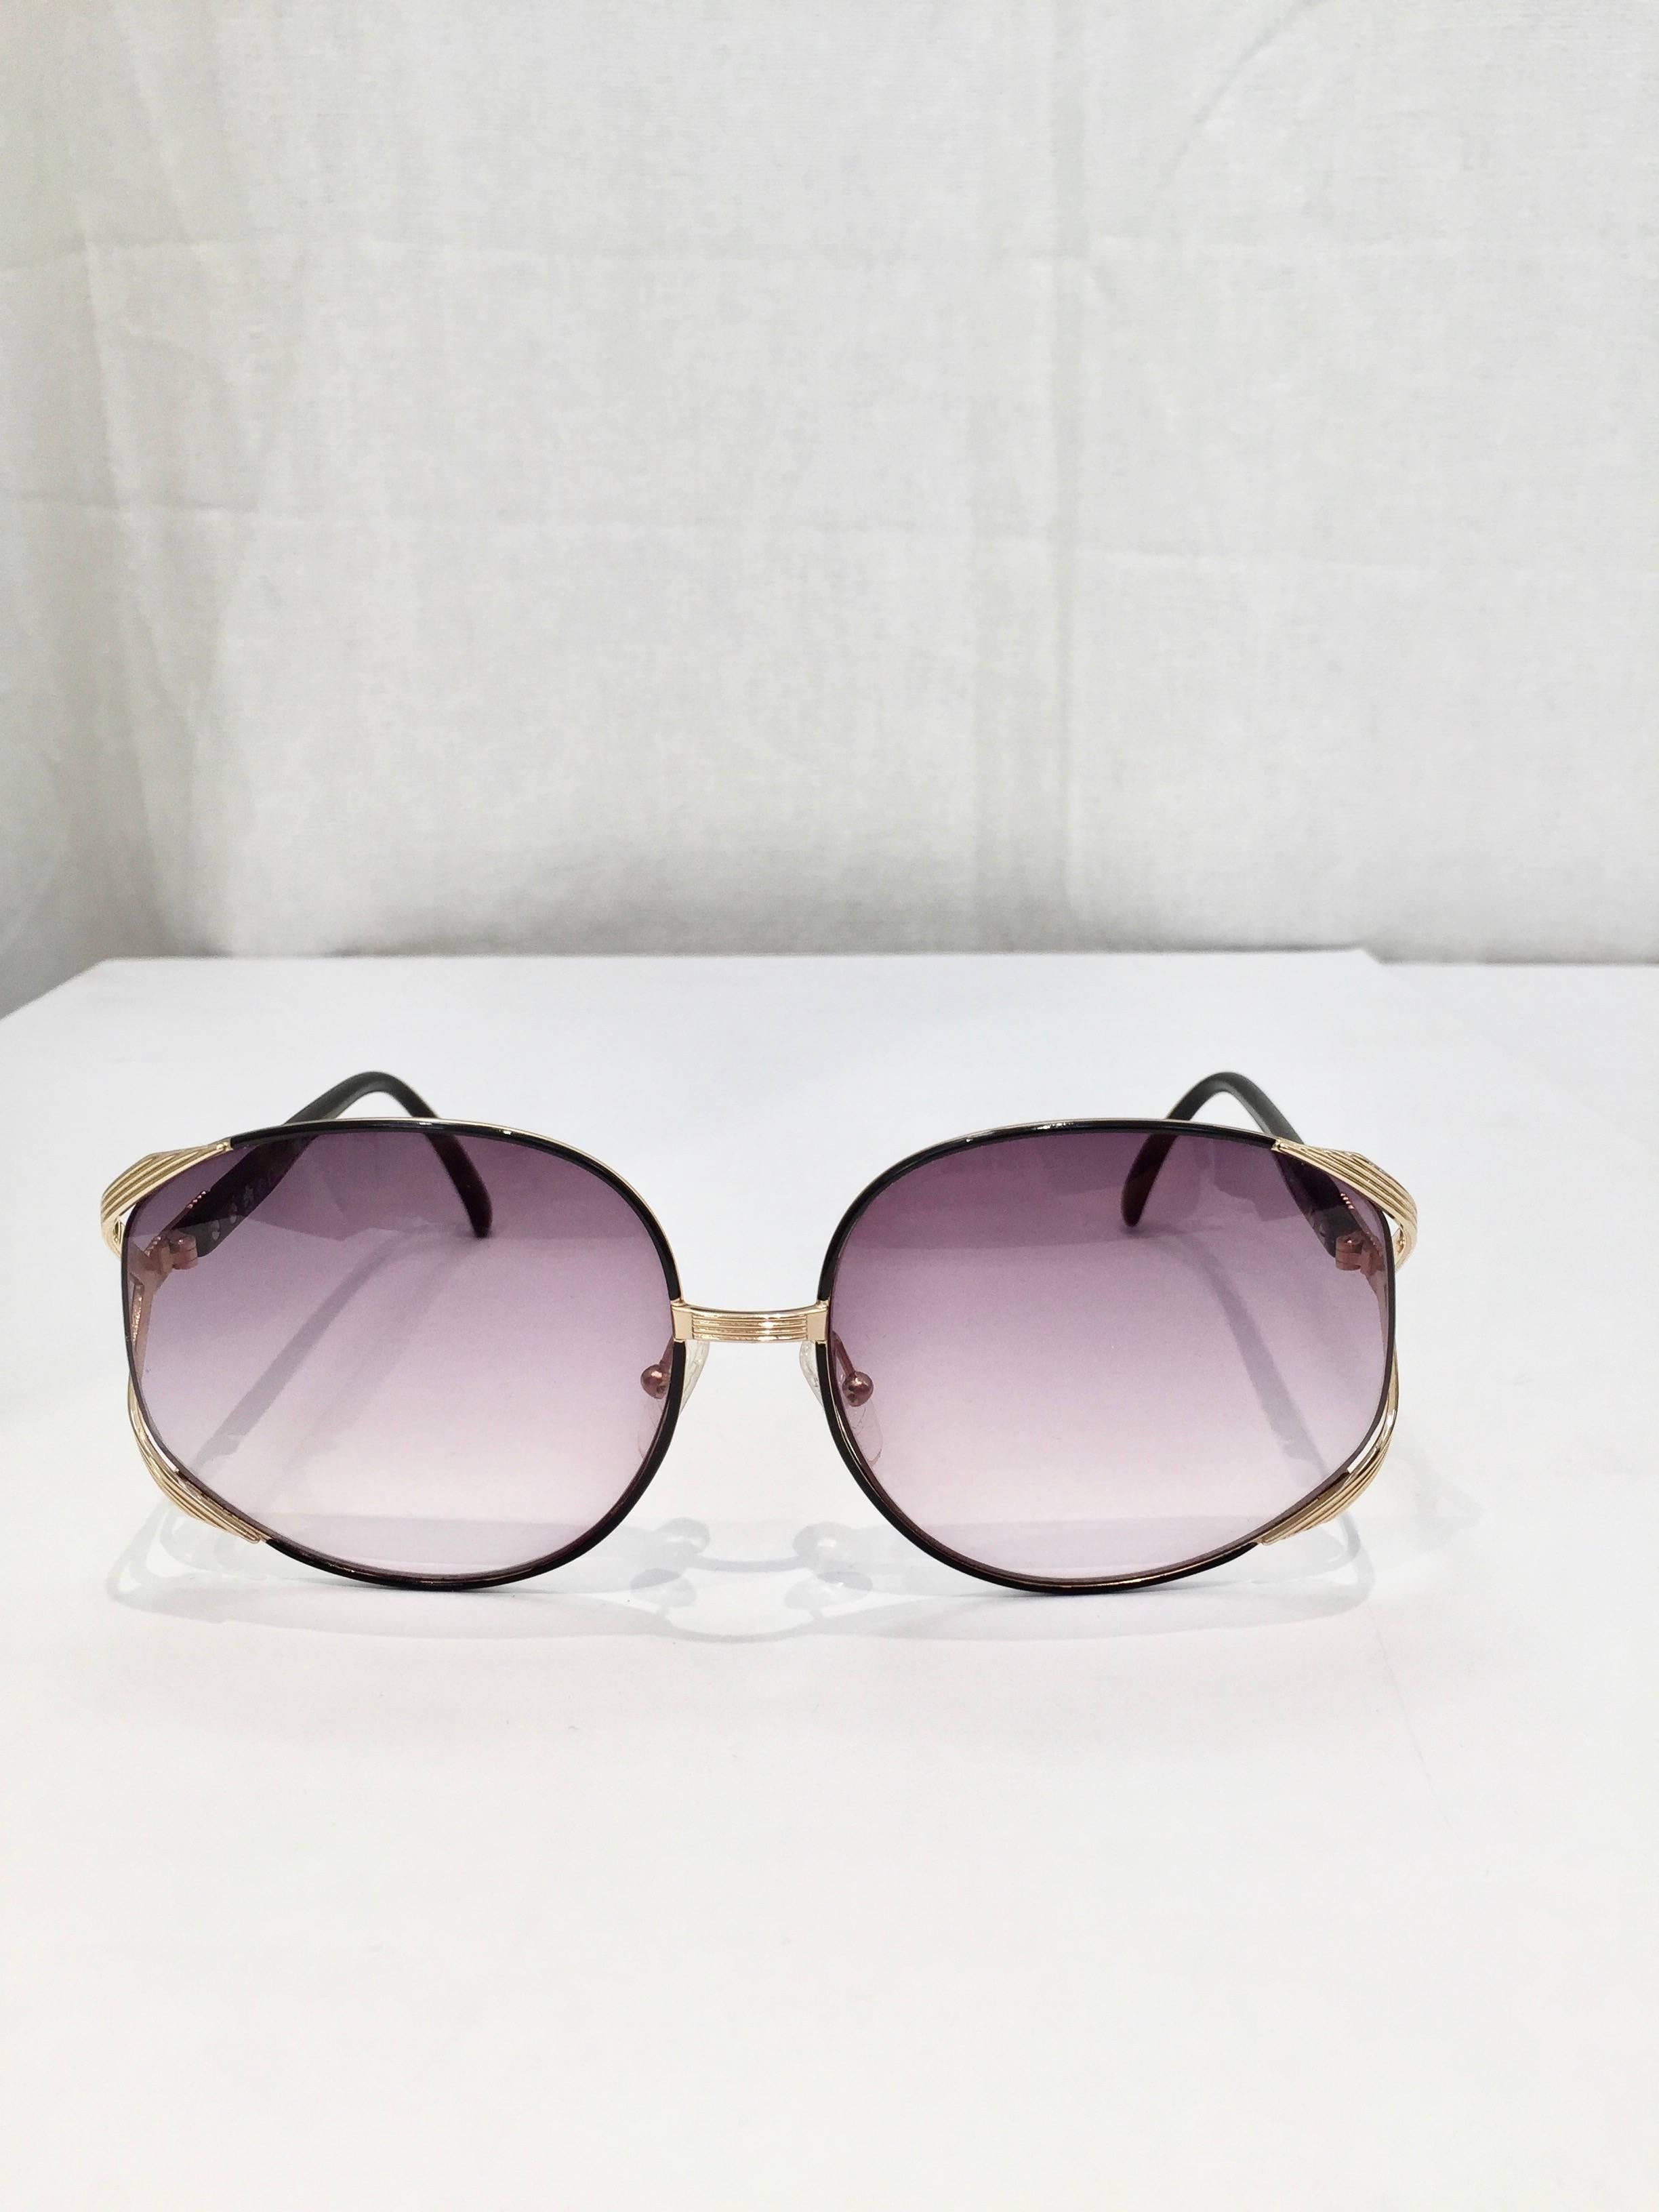 Amazing vintage  70s Dior sunglasses with black and gold frame. in great condition. no scratch.
